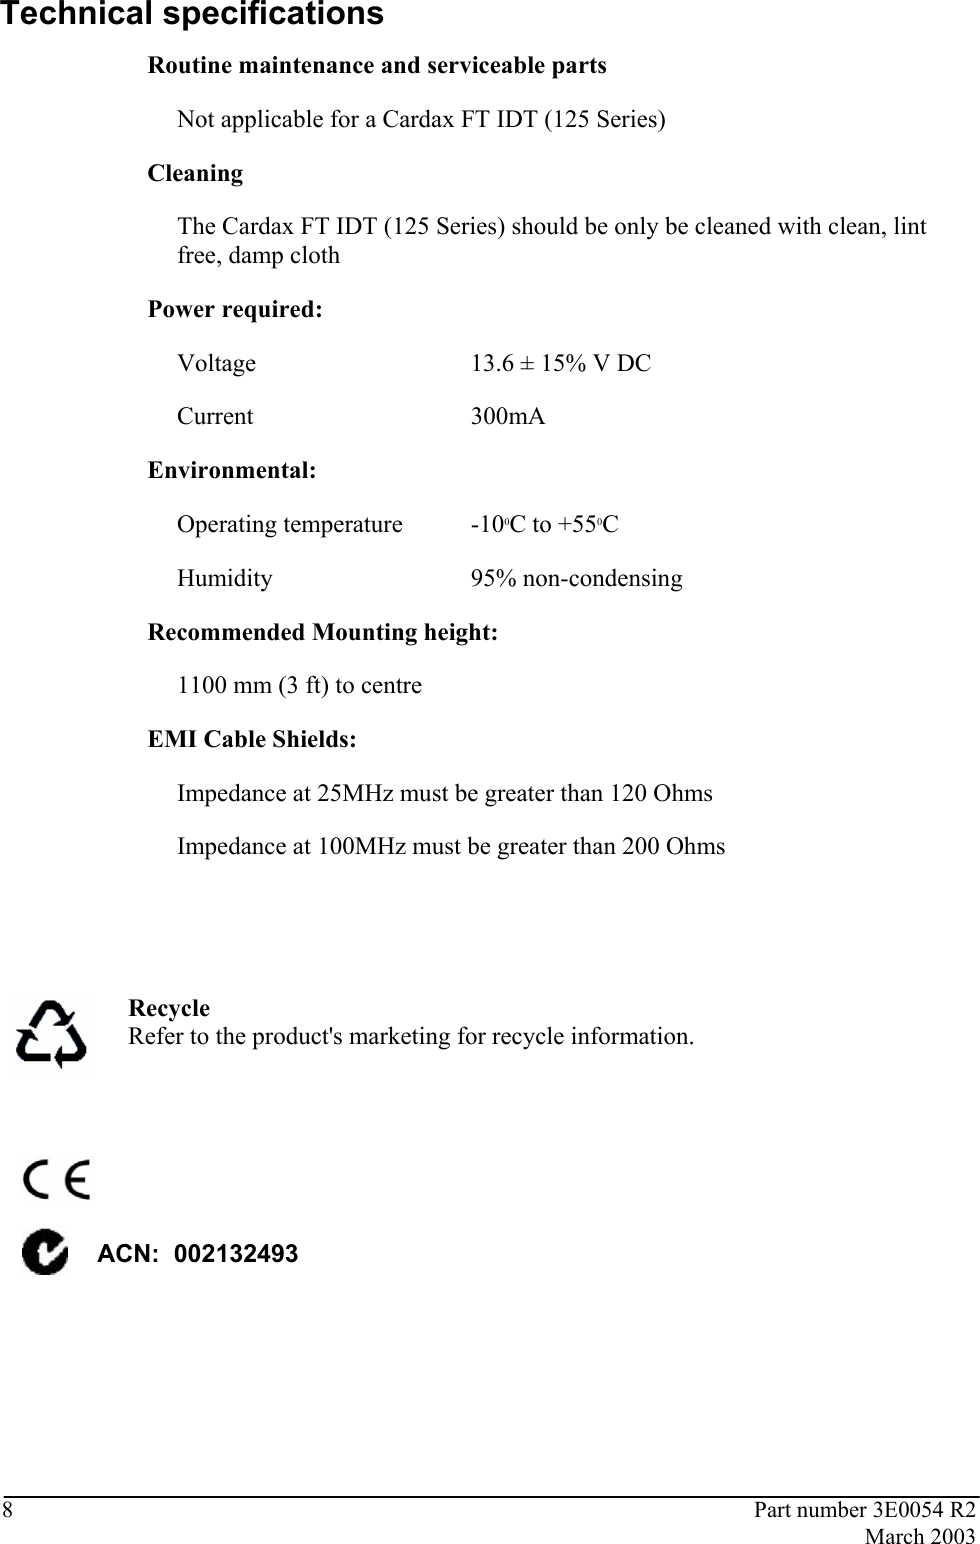  8  Part number 3E0054 R2  March 2003  Technical specifications Routine maintenance and serviceable parts   Not applicable for a Cardax FT IDT (125 Series)   Cleaning    The Cardax FT IDT (125 Series) should be only be cleaned with clean, lint free, damp cloth  Power required:   Voltage  13.6 ± 15% V DC  Current  300mA Environmental:  Operating temperature  -100C to +550C  Humidity  95% non-condensing Recommended Mounting height:  1100 mm (3 ft) to centre   EMI Cable Shields:    Impedance at 25MHz must be greater than 120 Ohms Impedance at 100MHz must be greater than 200 Ohms     Recycle Refer to the product&apos;s marketing for recycle information.     ACN:  002132493    